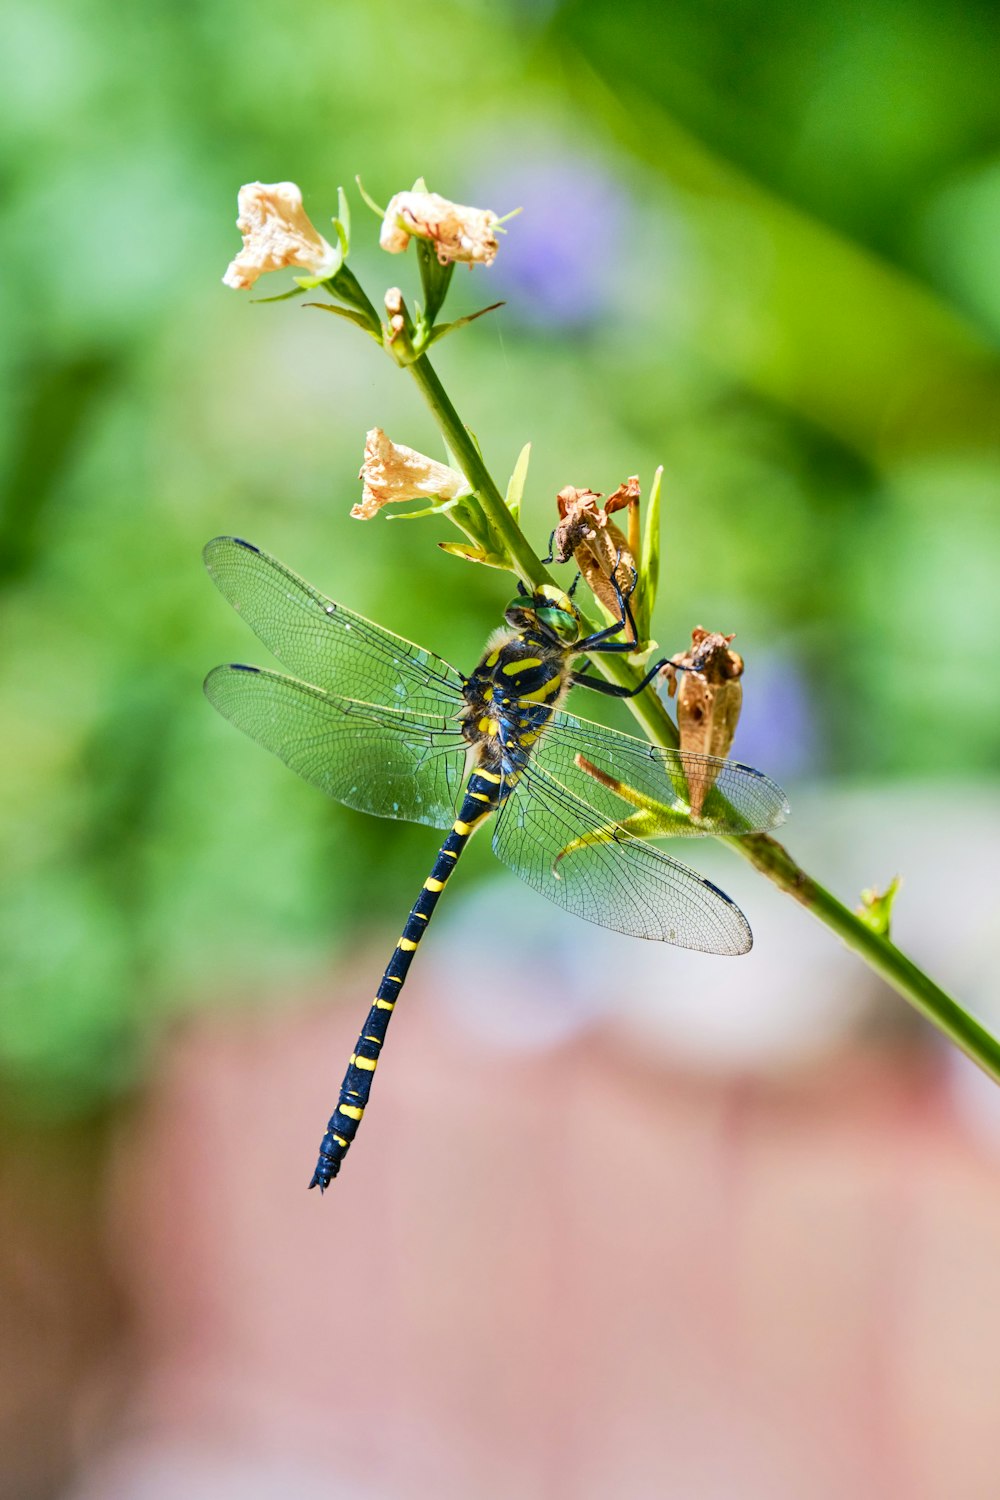 blue and black dragonfly perched on white flower in close up photography during daytime